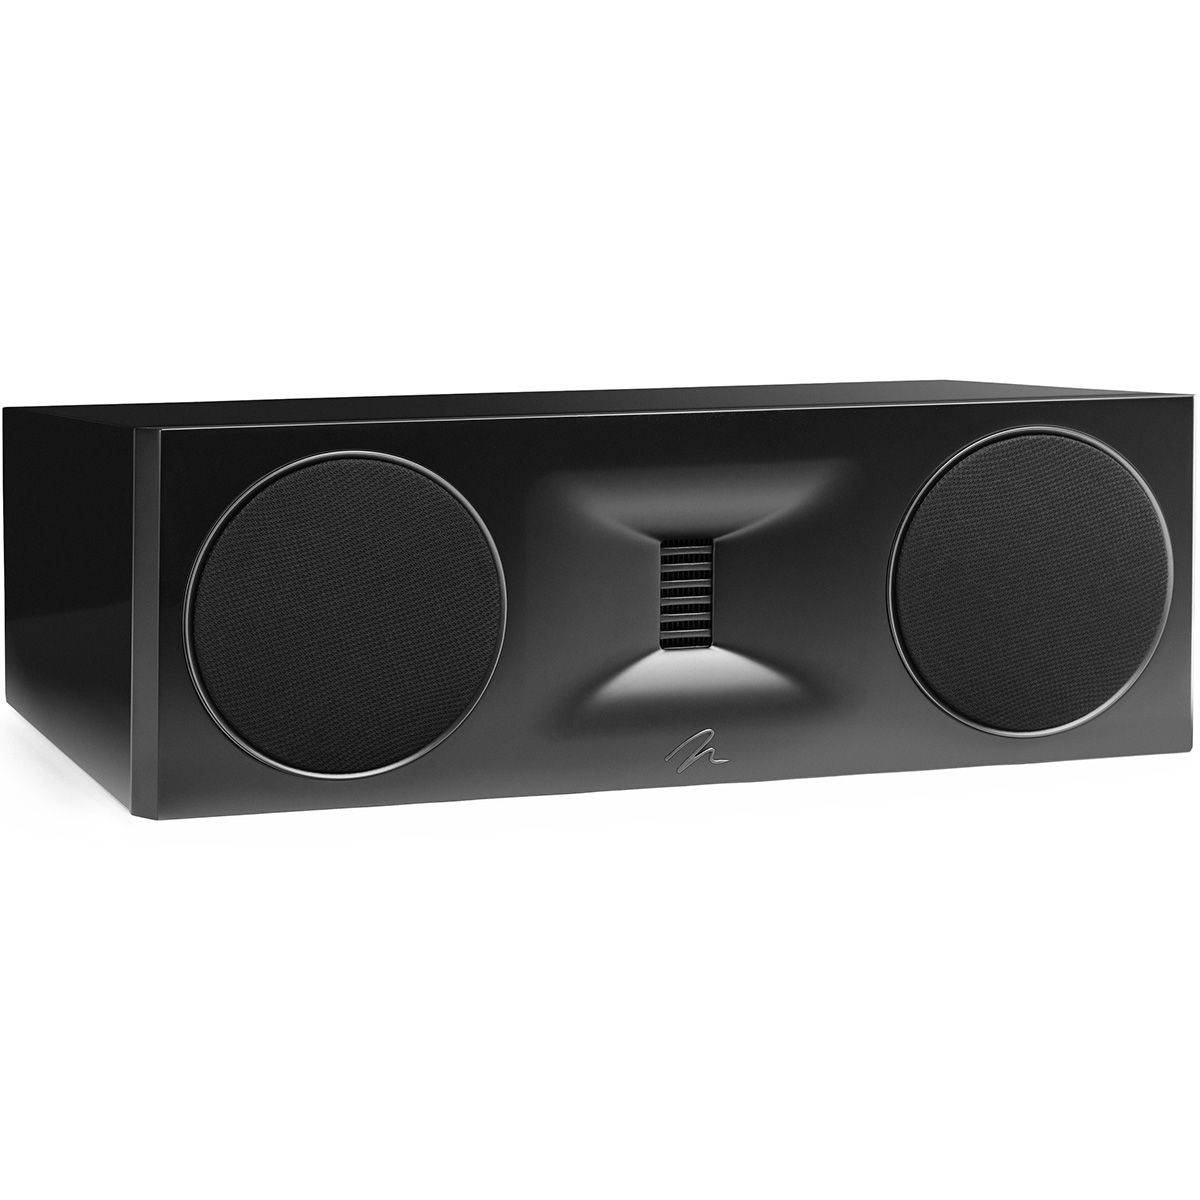 MartinLogan XT C100 center channel speaker front angle view in black with grilles